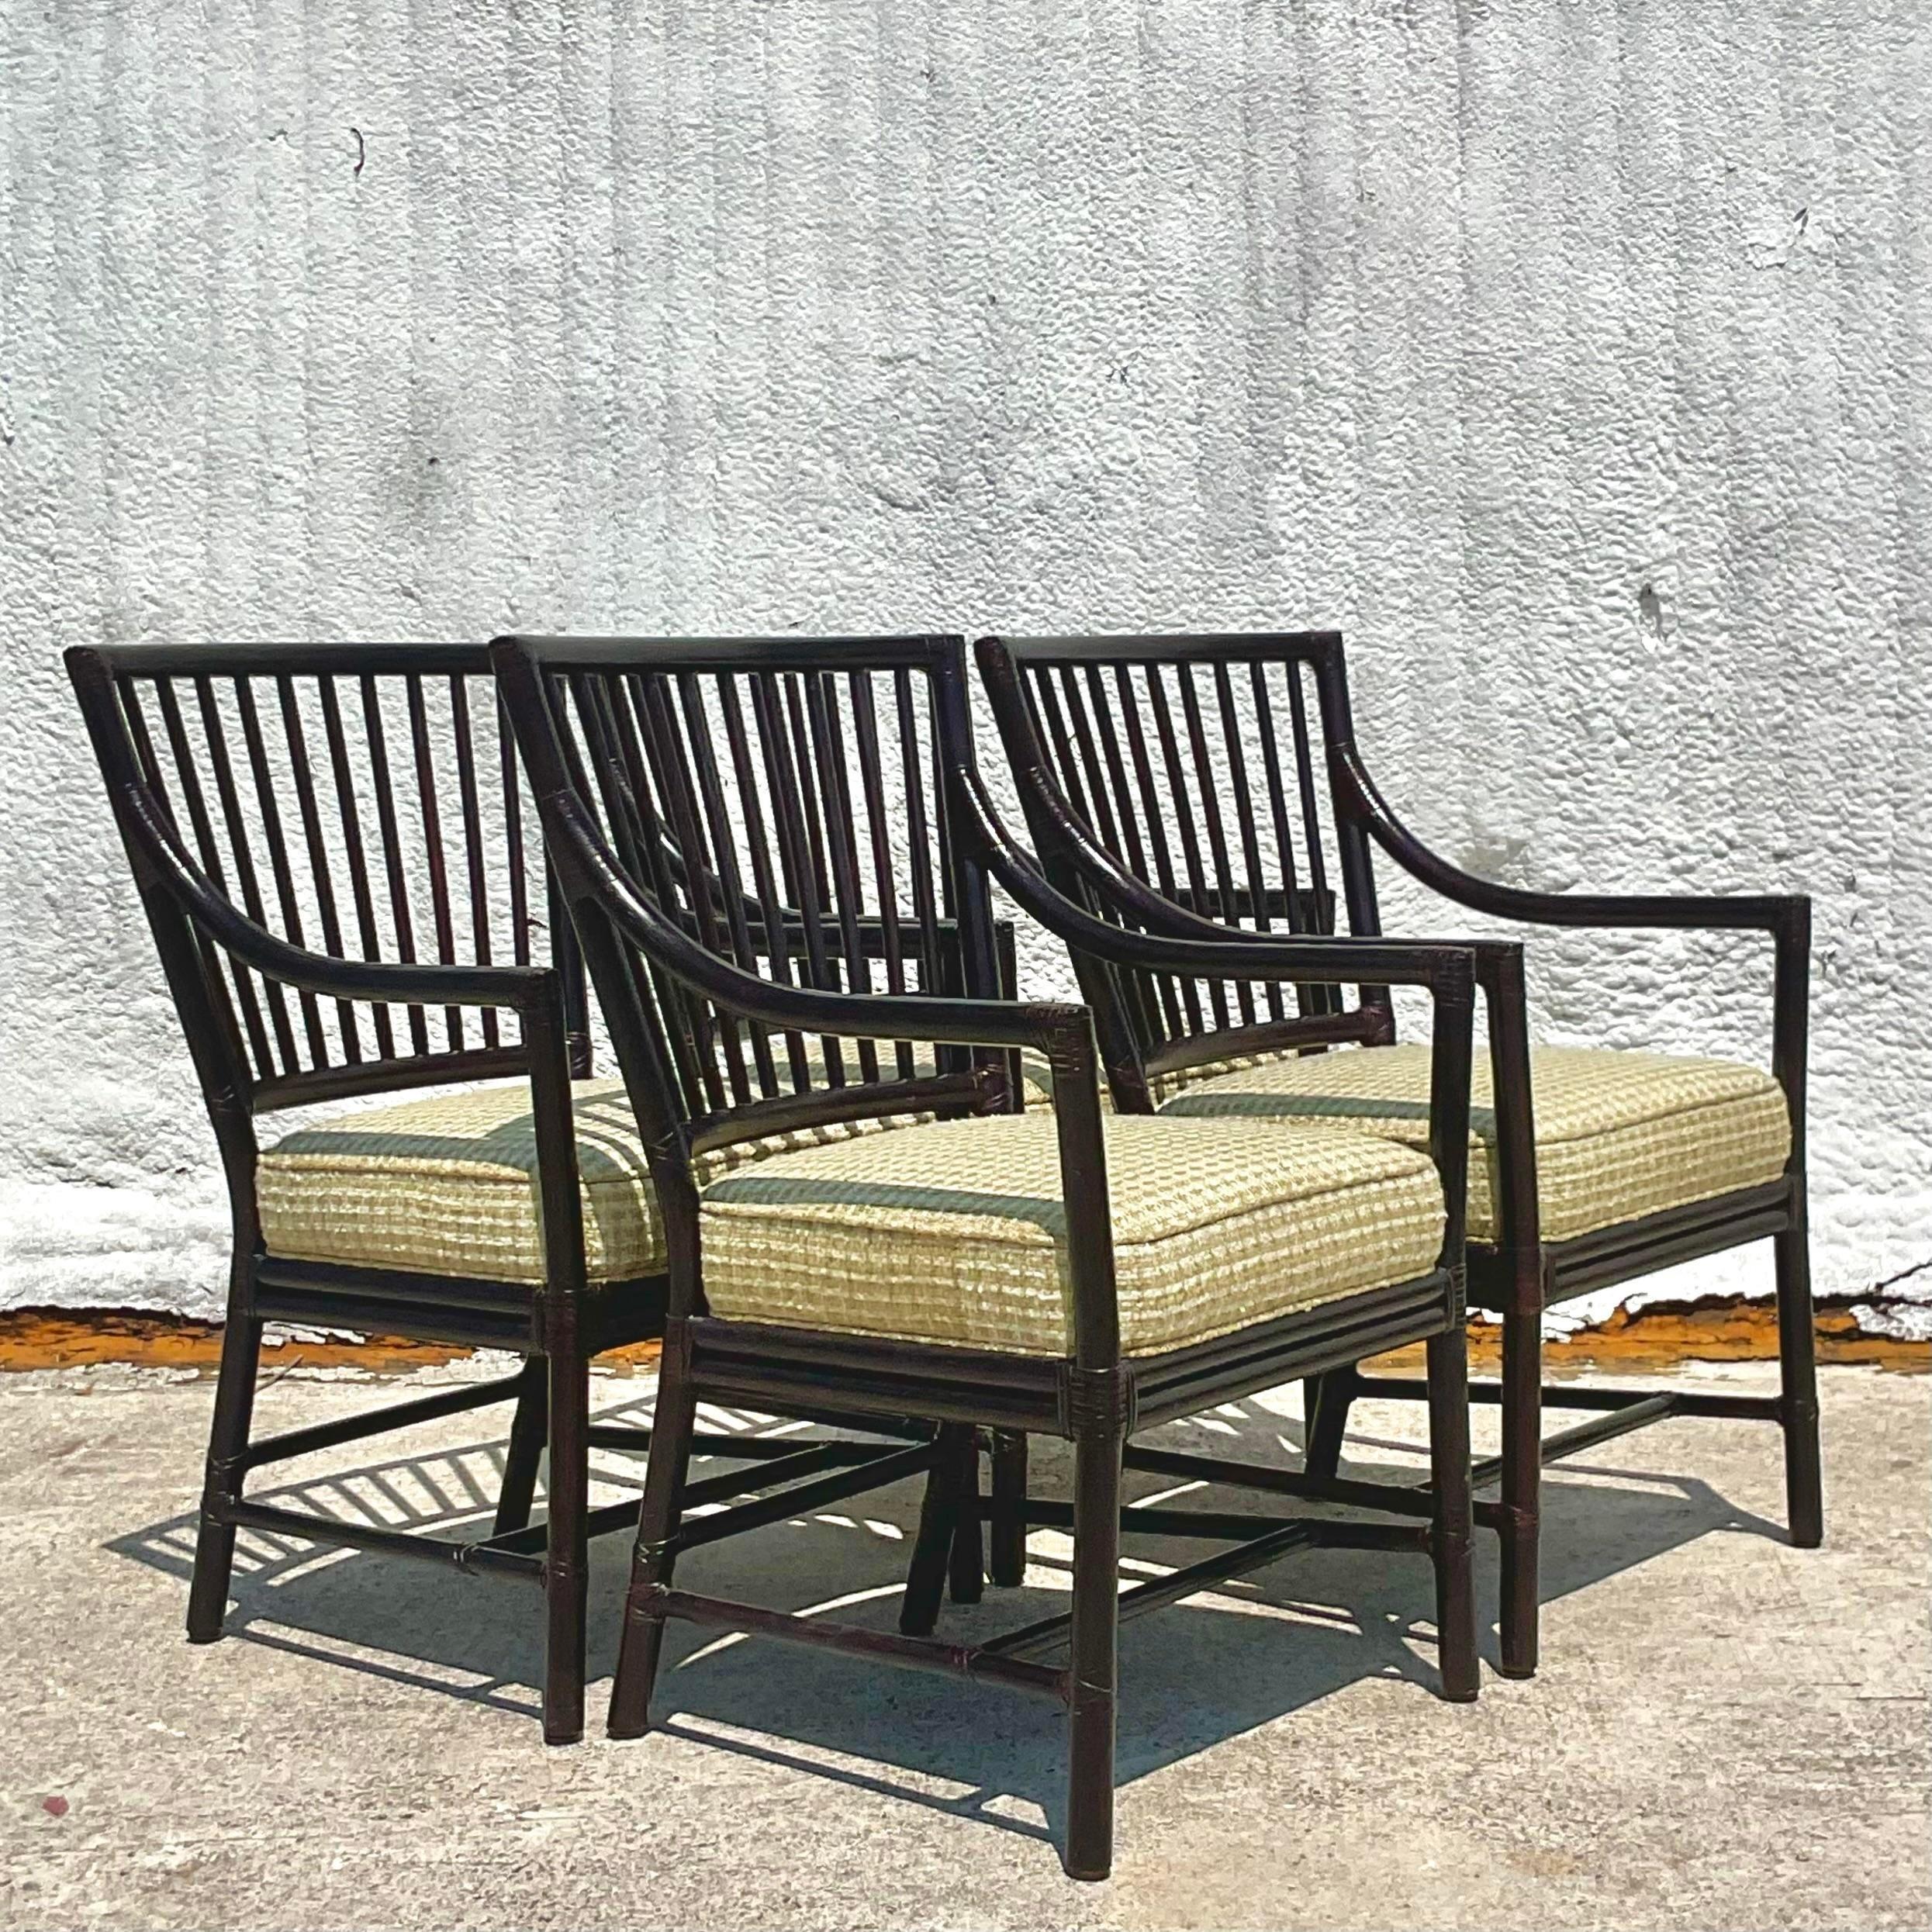 A fantastic set of four vintage Coastal slat back arm chairs. Made by the iconic McGuire group and tagged on the bottom. Chic bent rattan in an ebony finish. A pale green tweedy boucle upholstery. Acquired from a Miami estate.